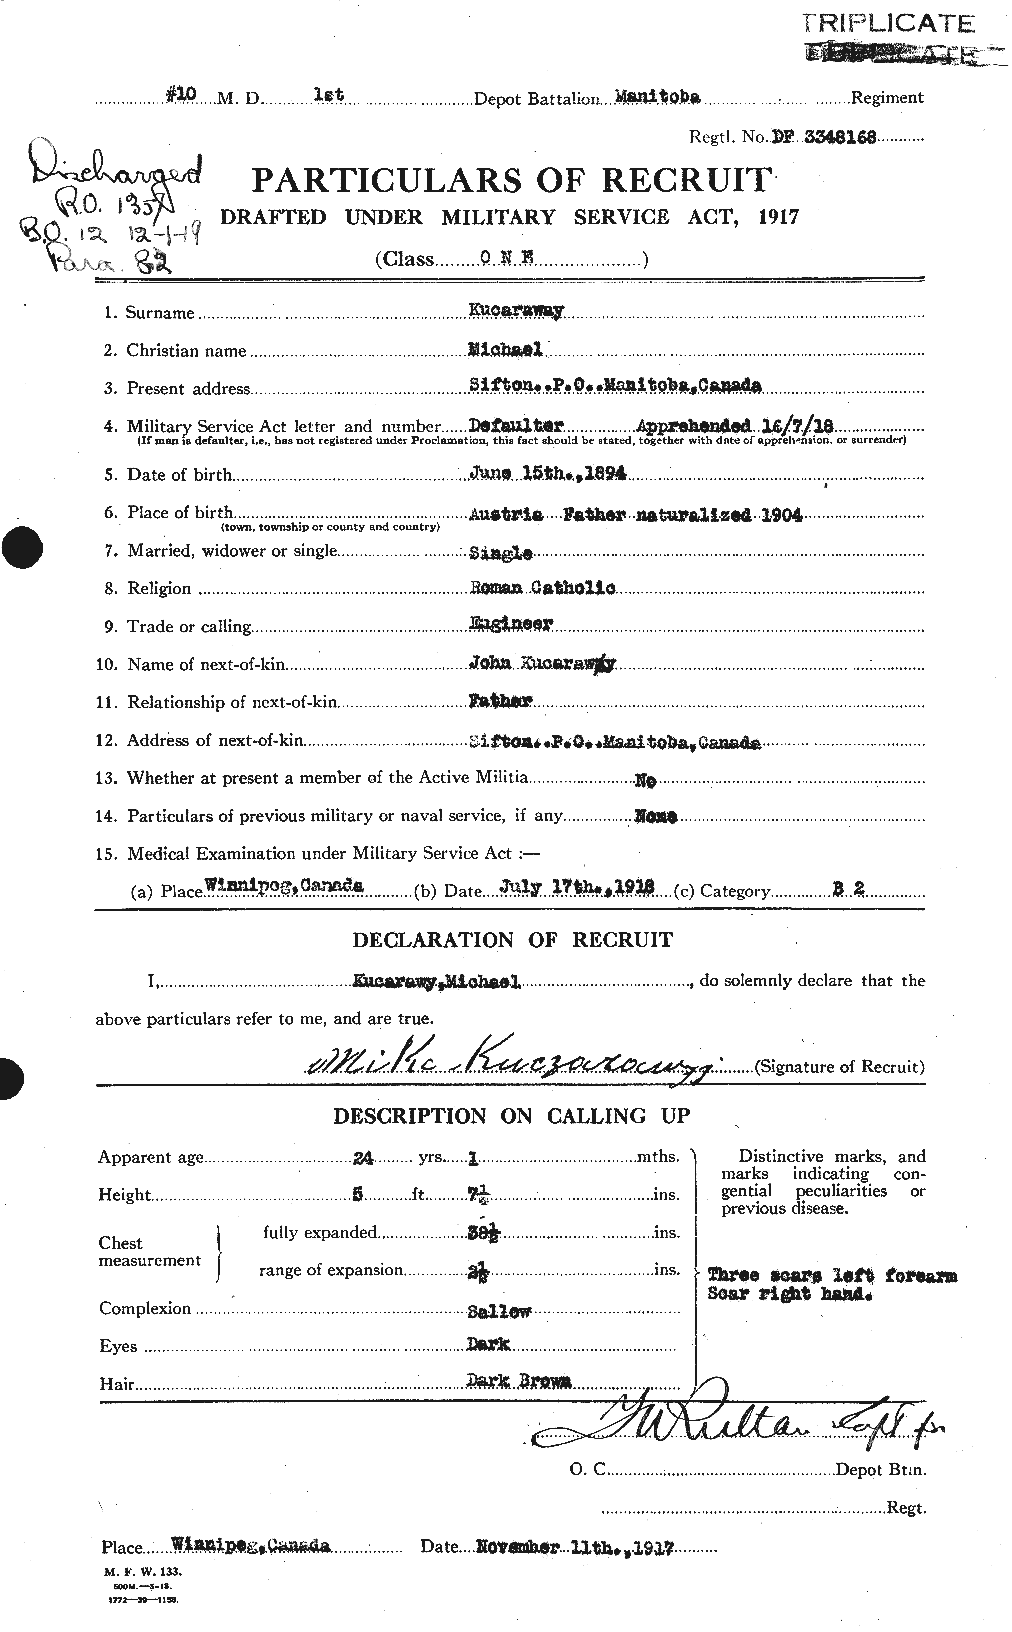 Personnel Records of the First World War - CEF 441360a